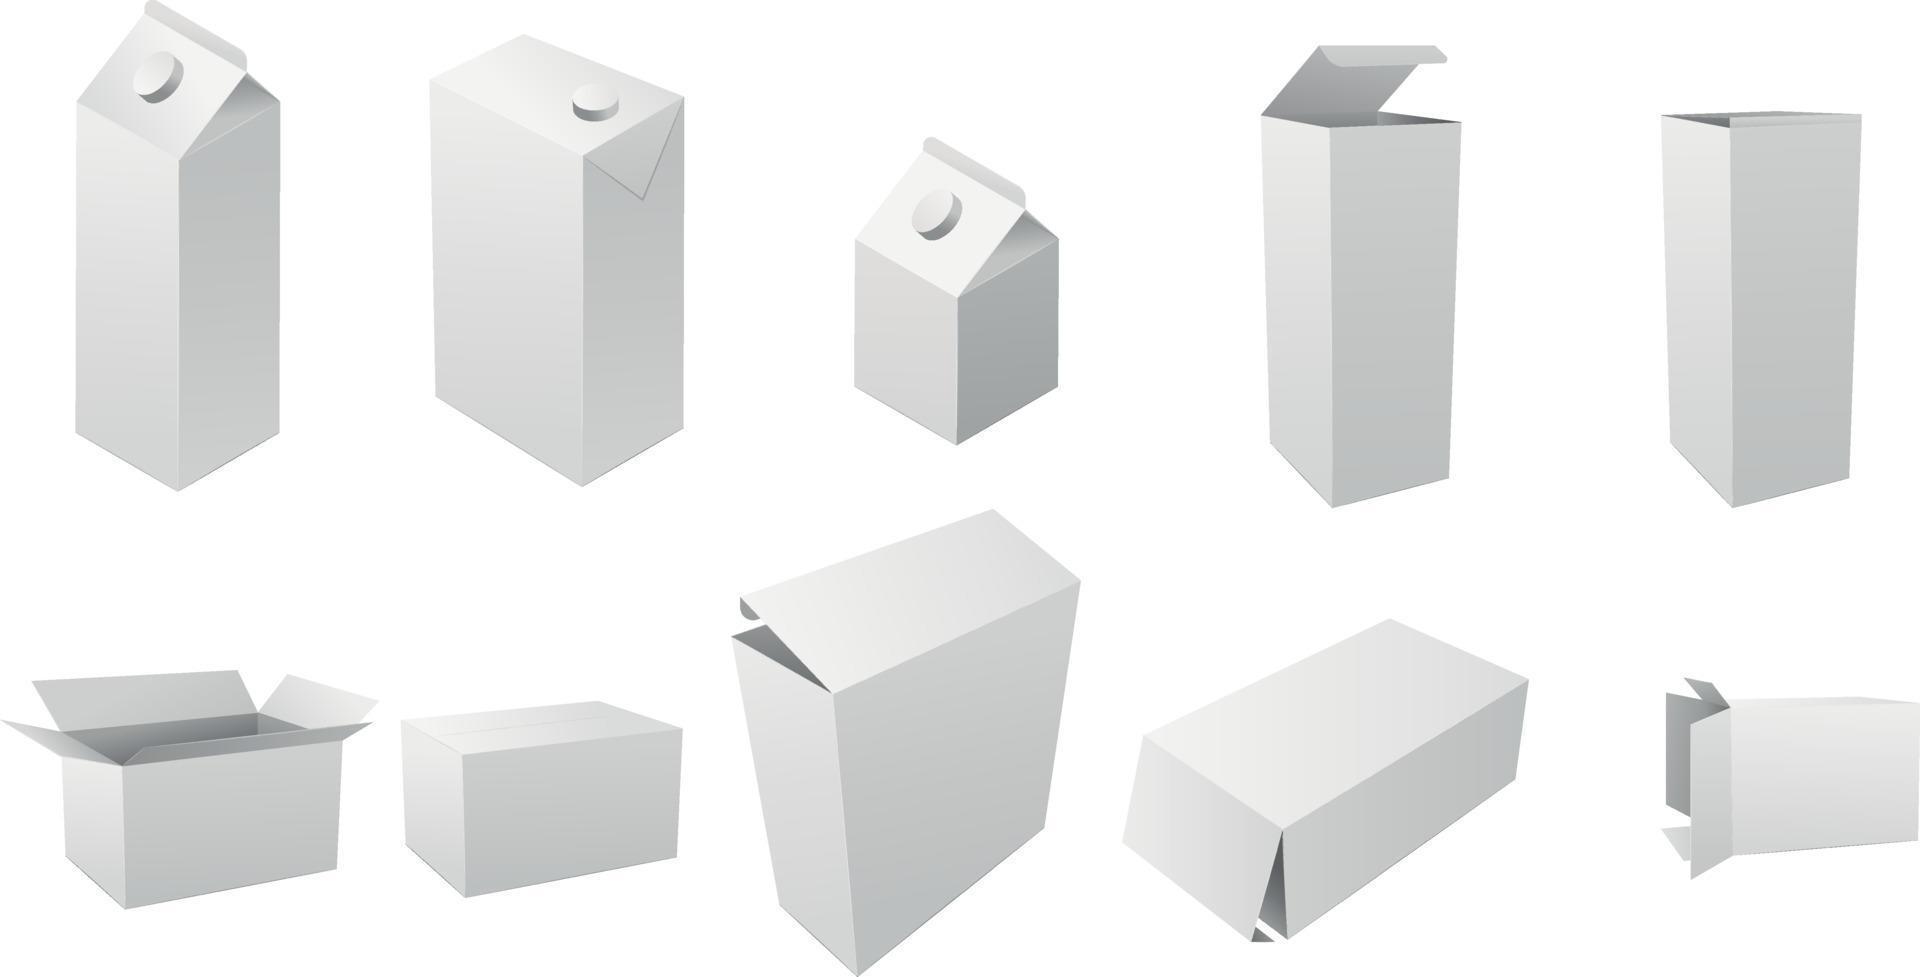 Set of realistic vertical tall cardboard rectangular cosmetic or medical packaging, paper boxes. Milk and juice boxes. Realistic mockup of a tall white cardboard box, 3d blank templates. vector